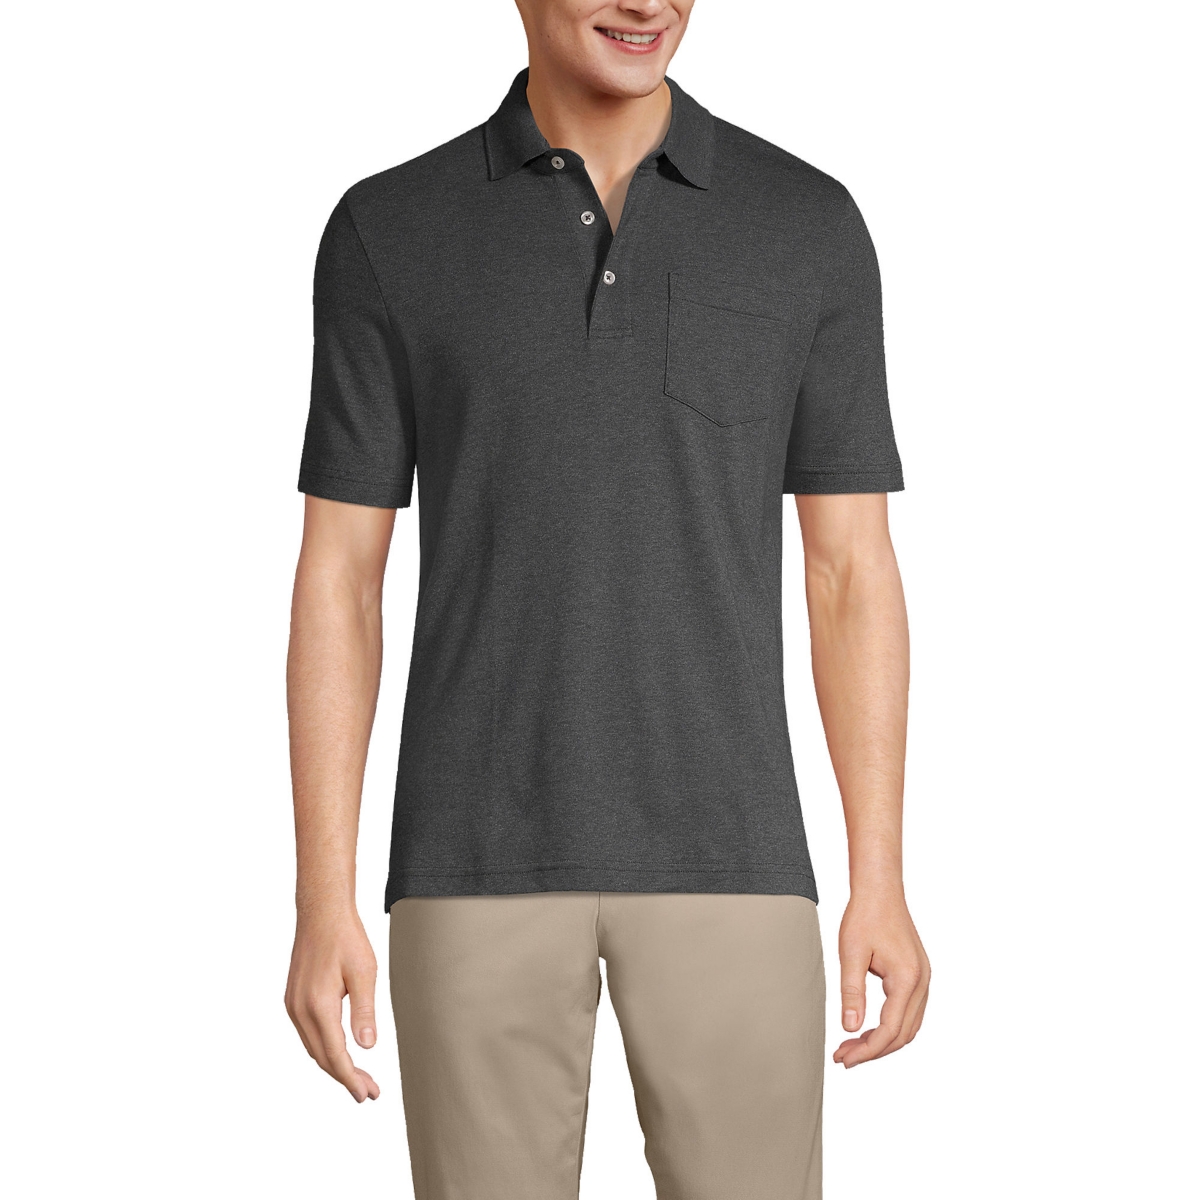 Men's Short Sleeve Cotton Supima Polo Shirt with Pocket - Muted blue